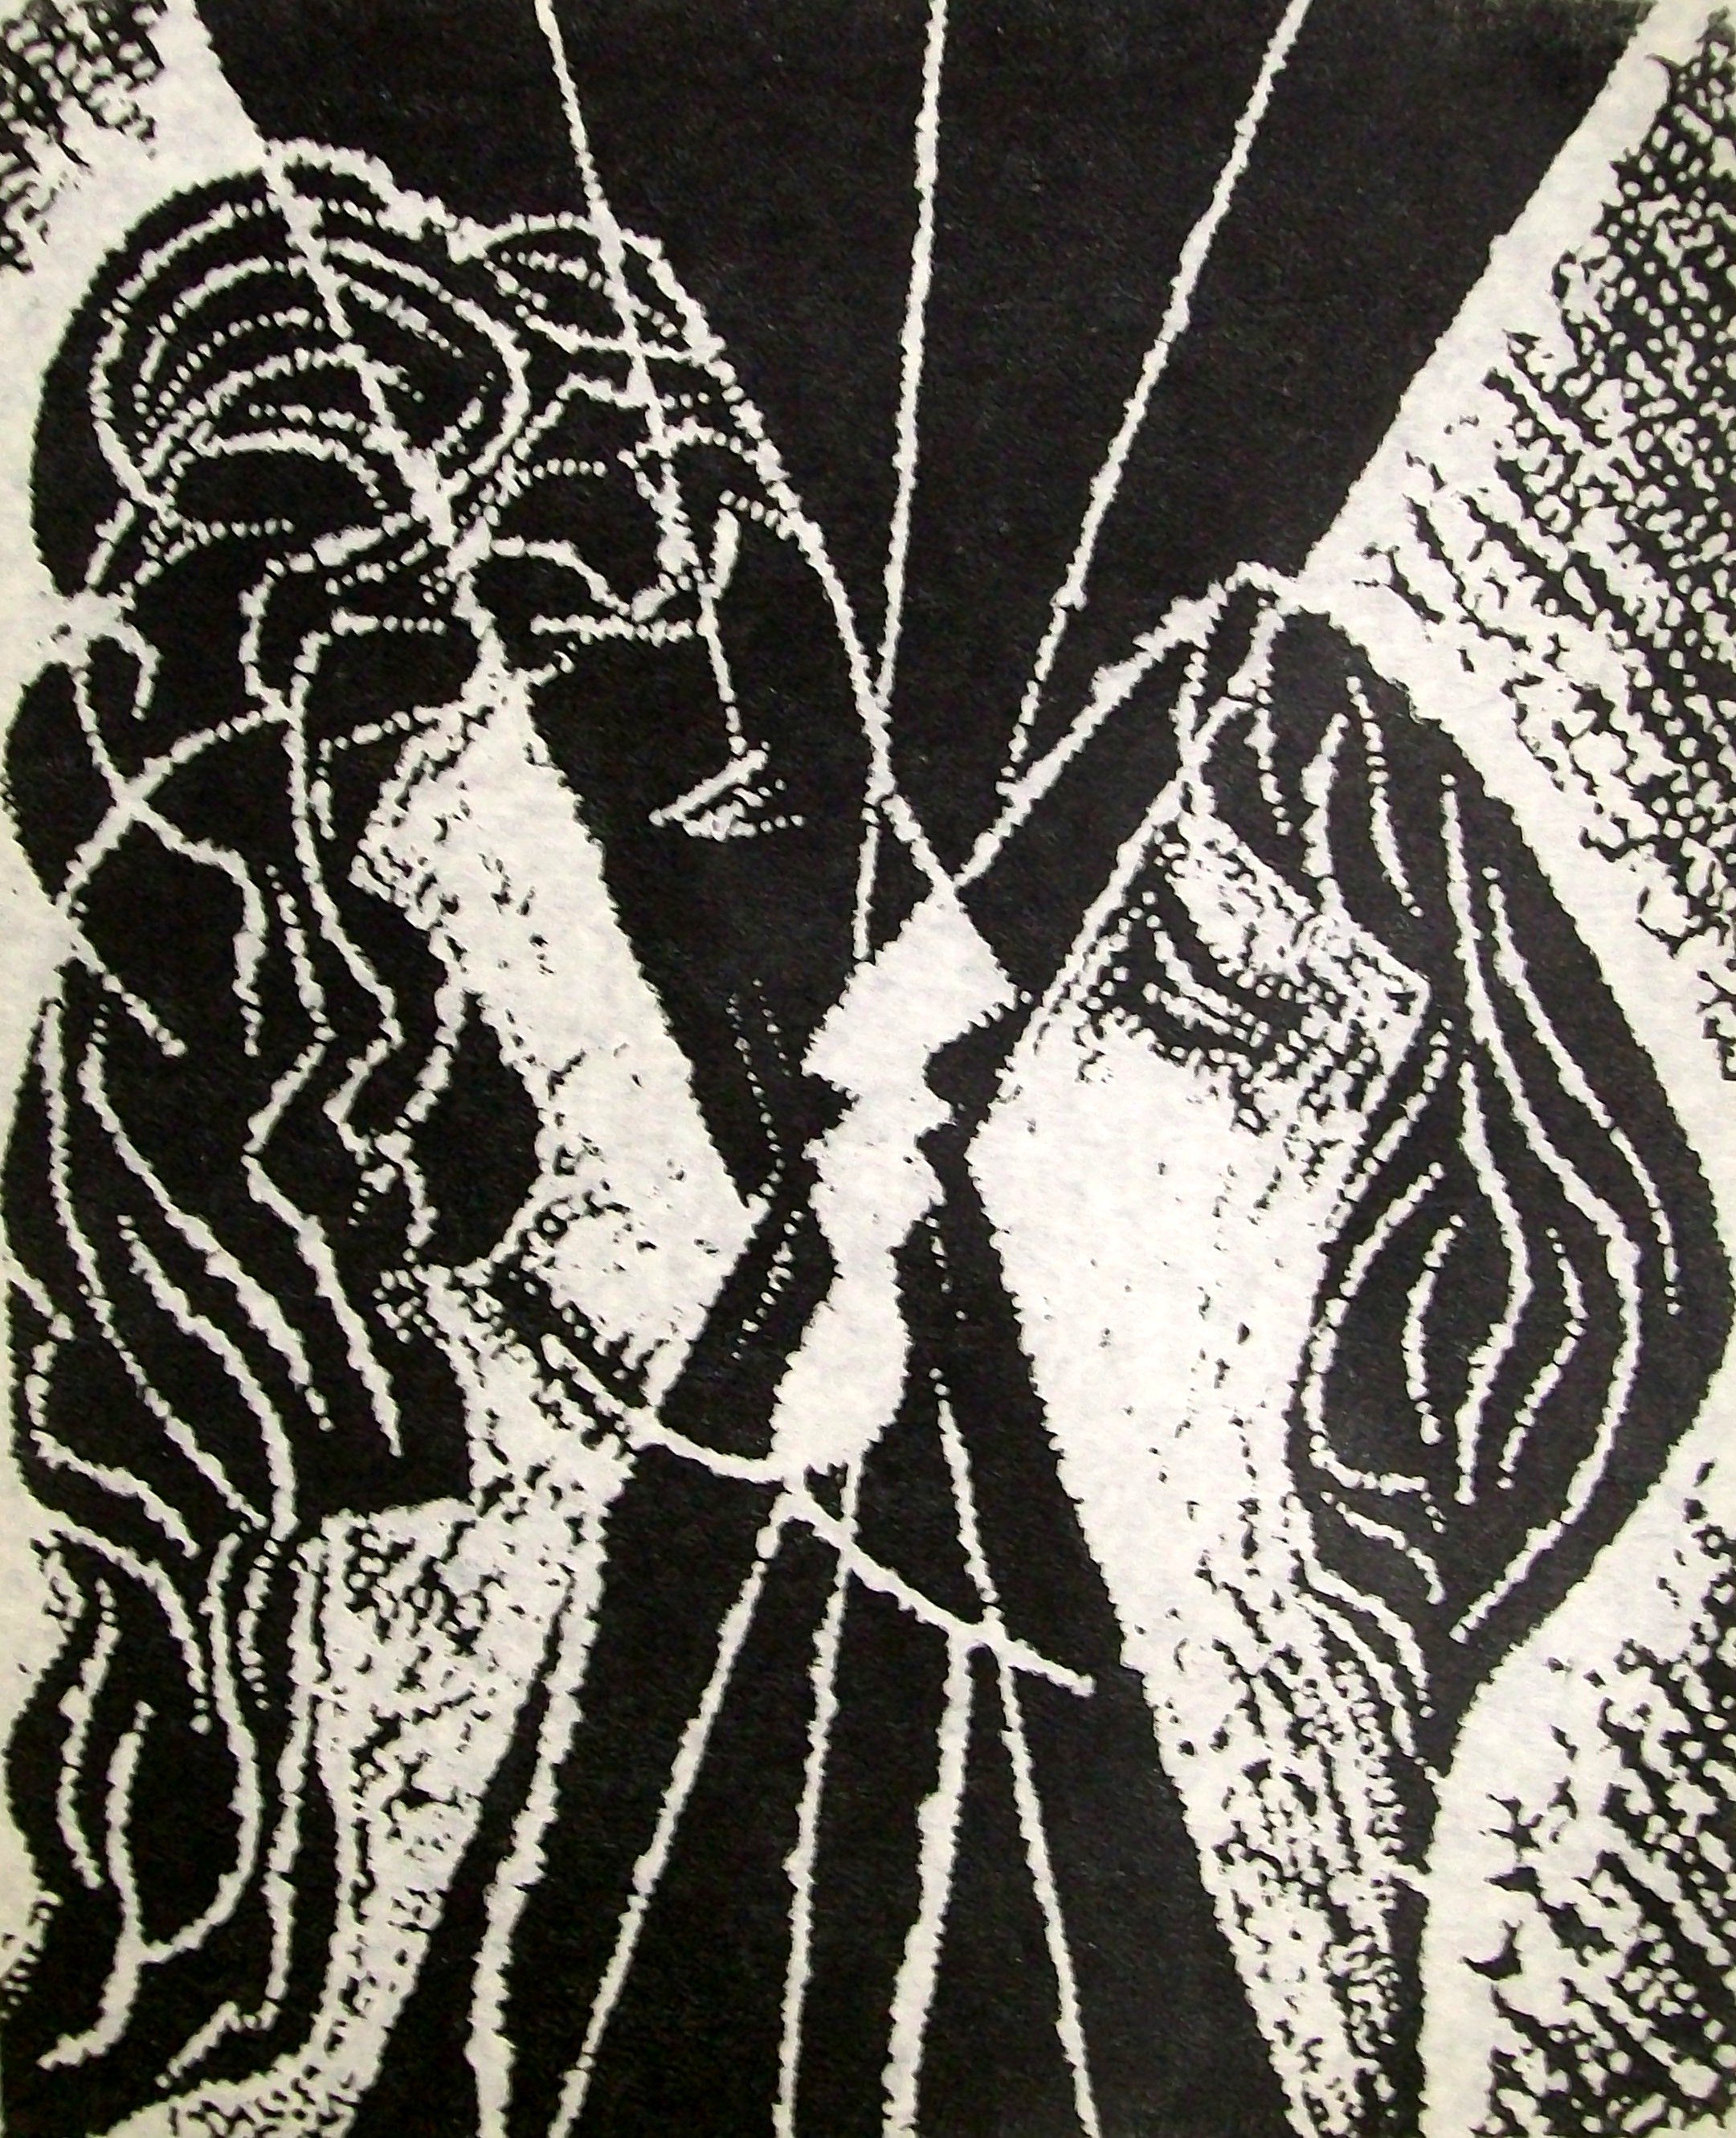 Stanley Lewis, Couple, Stone cut print on rice paper, 1971, 61.5x46cm